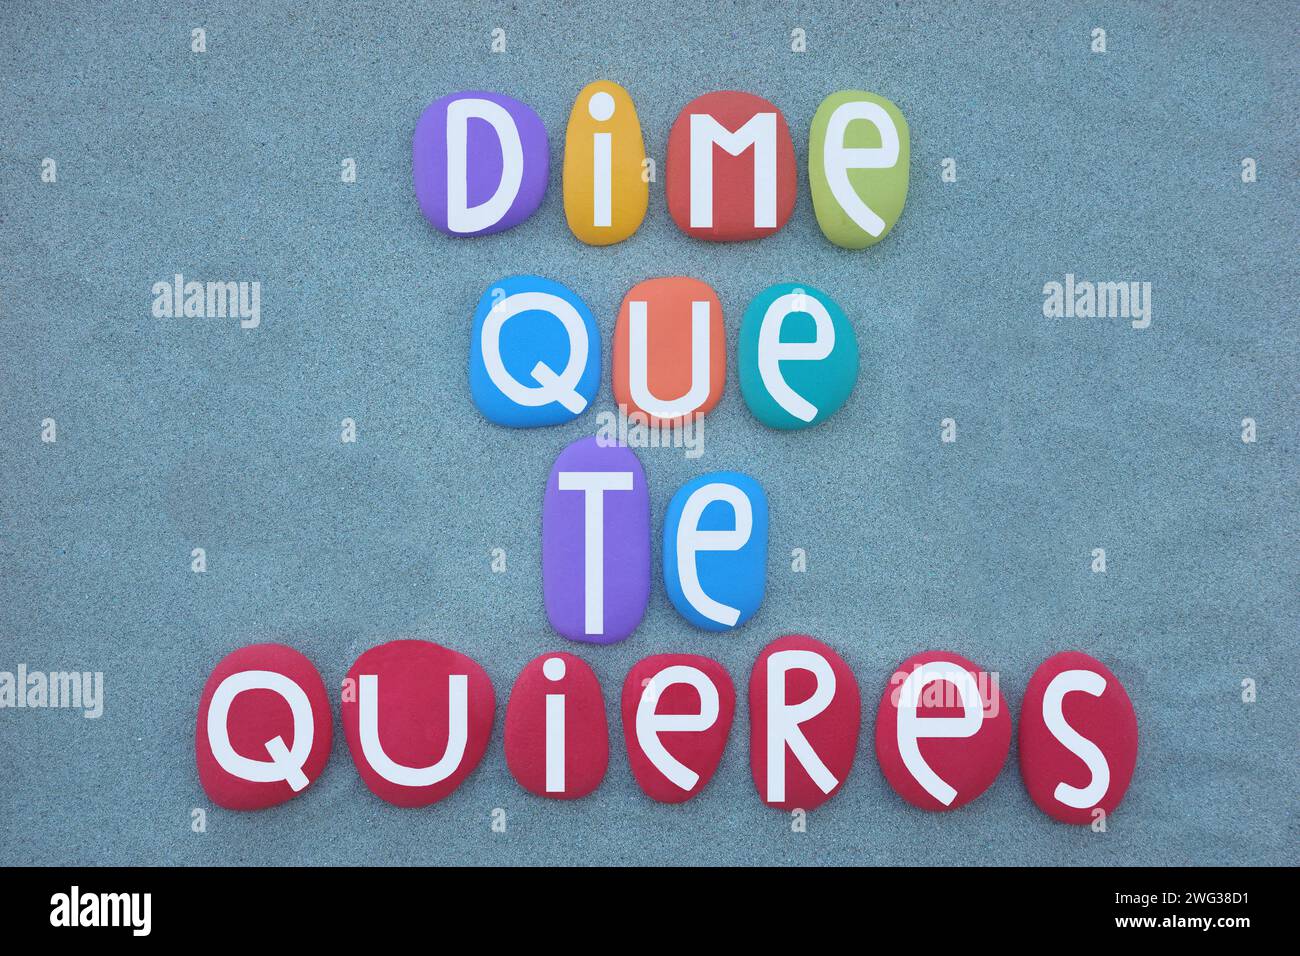 Dime que te quieres, tell me he loves you, spanish love text composed with hand painted multi colored stone letters over green sand Stock Photo